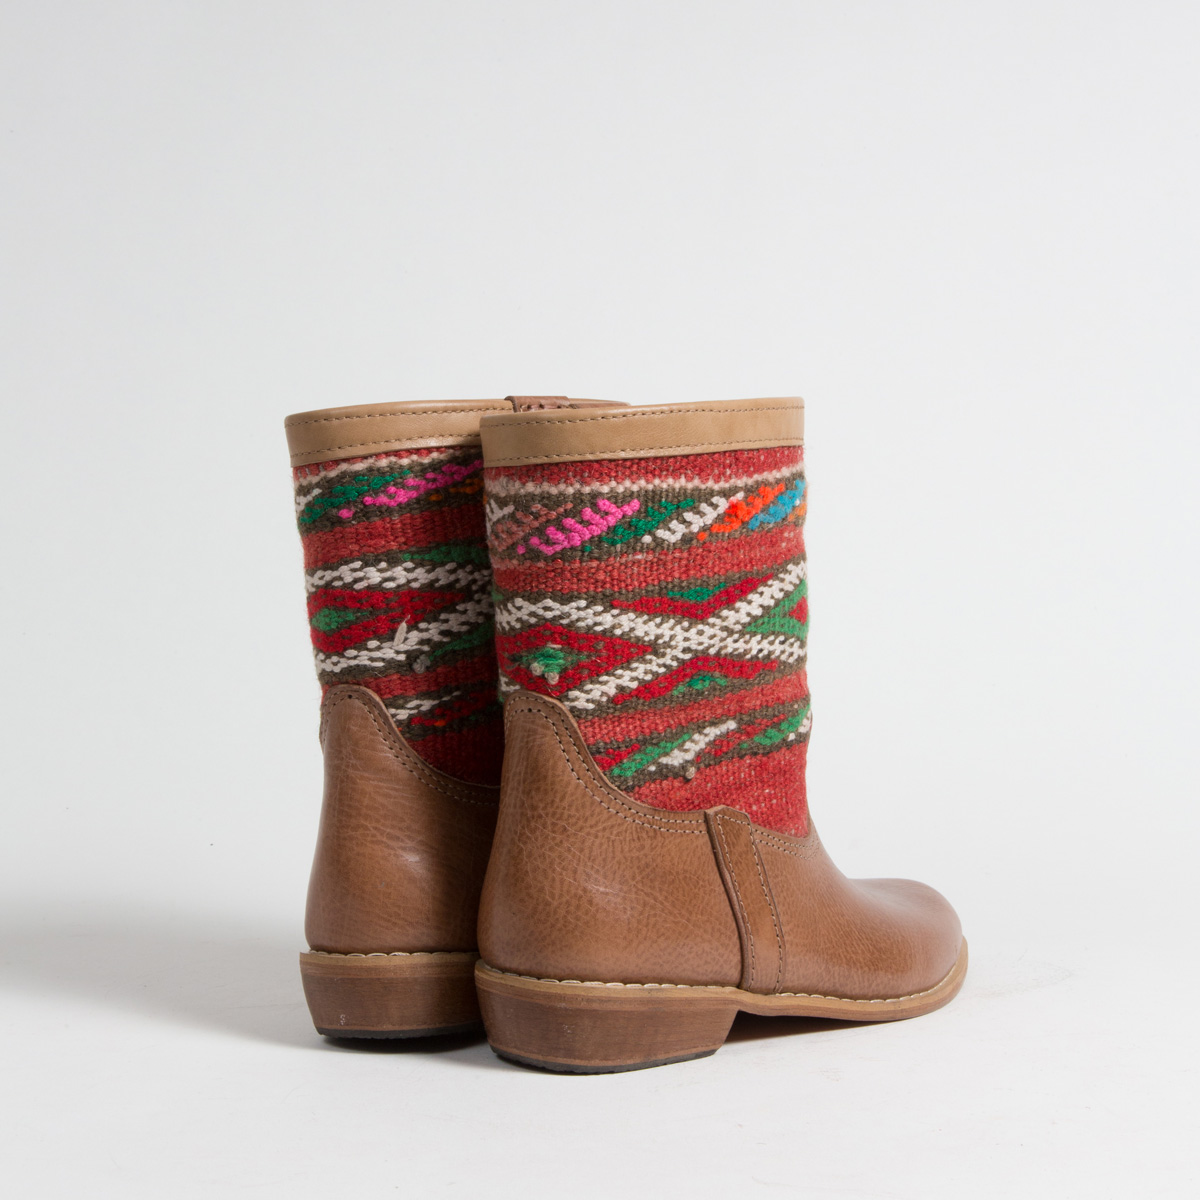 Bottines Kilim cuir mababouche artisanales (Réf. MCH2-37)